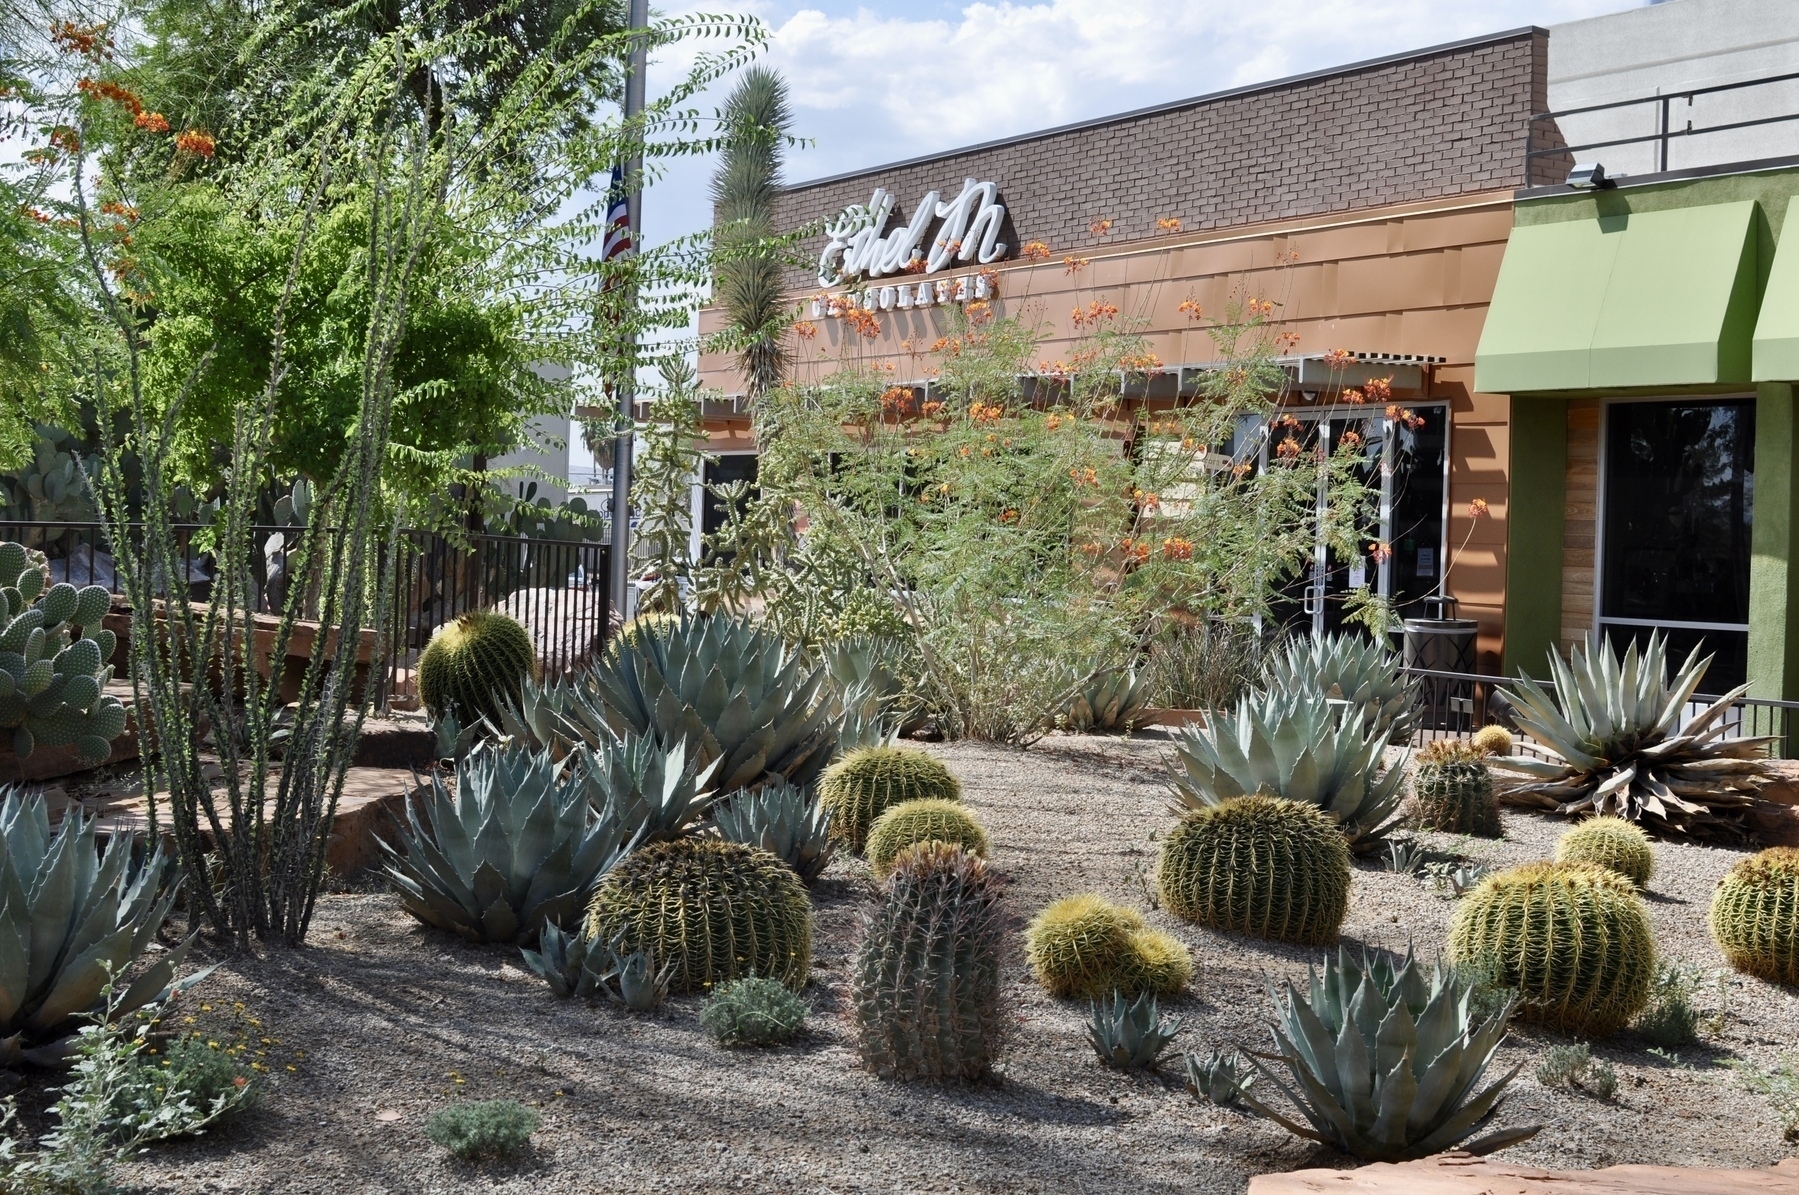 A variety of short cacti in front of the “Ethel M Chocolates” factory.